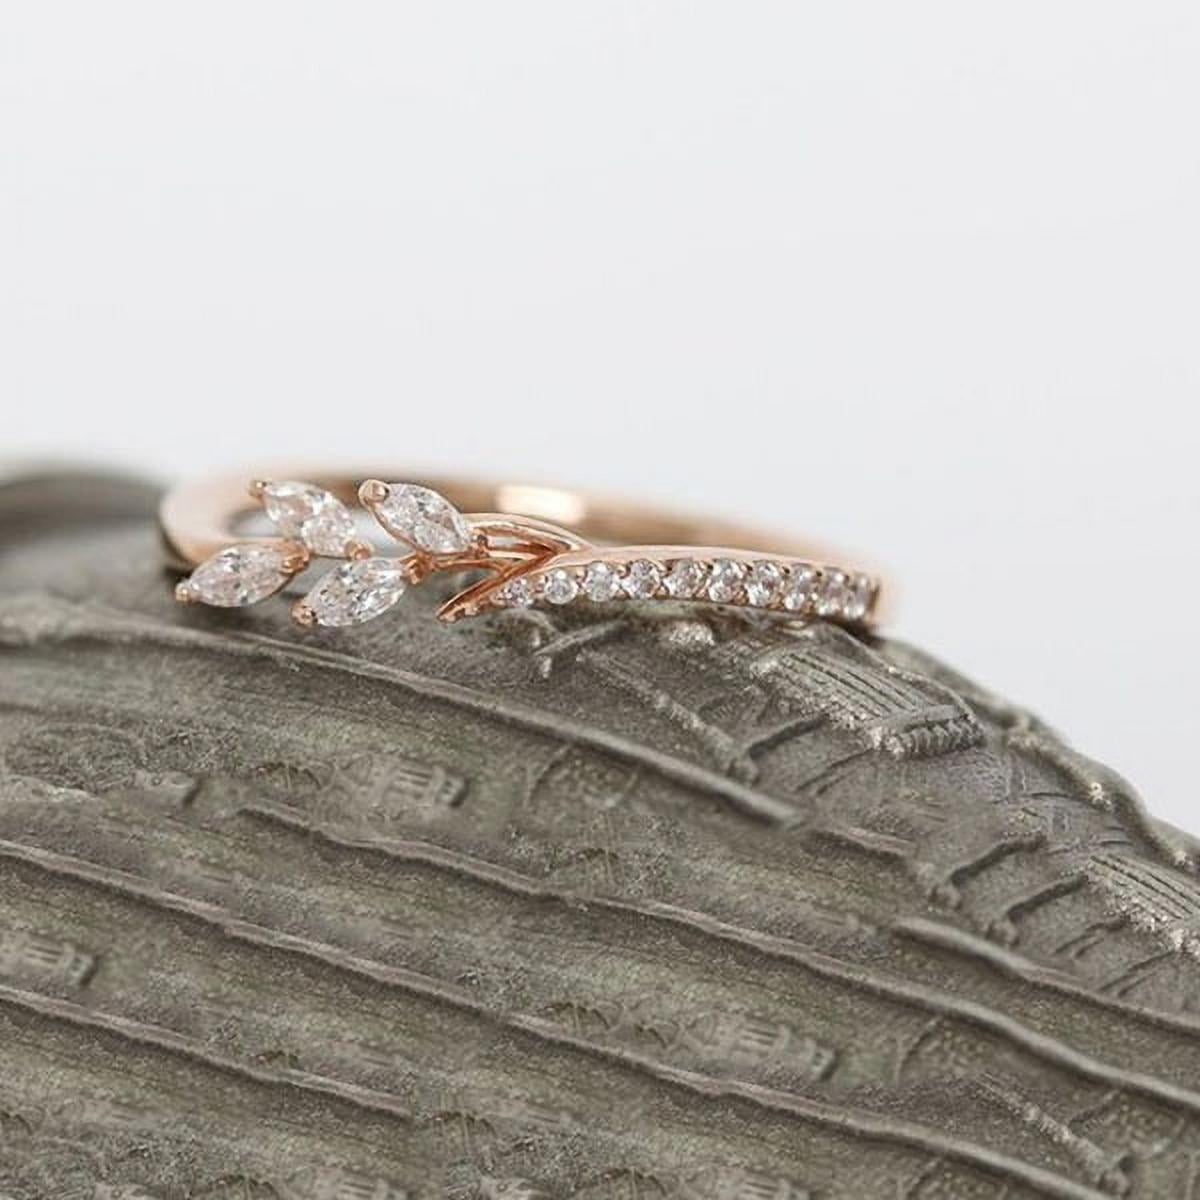 Eternity Wedding Band, Pink Gold and Diamonds - Categories Q9L95J